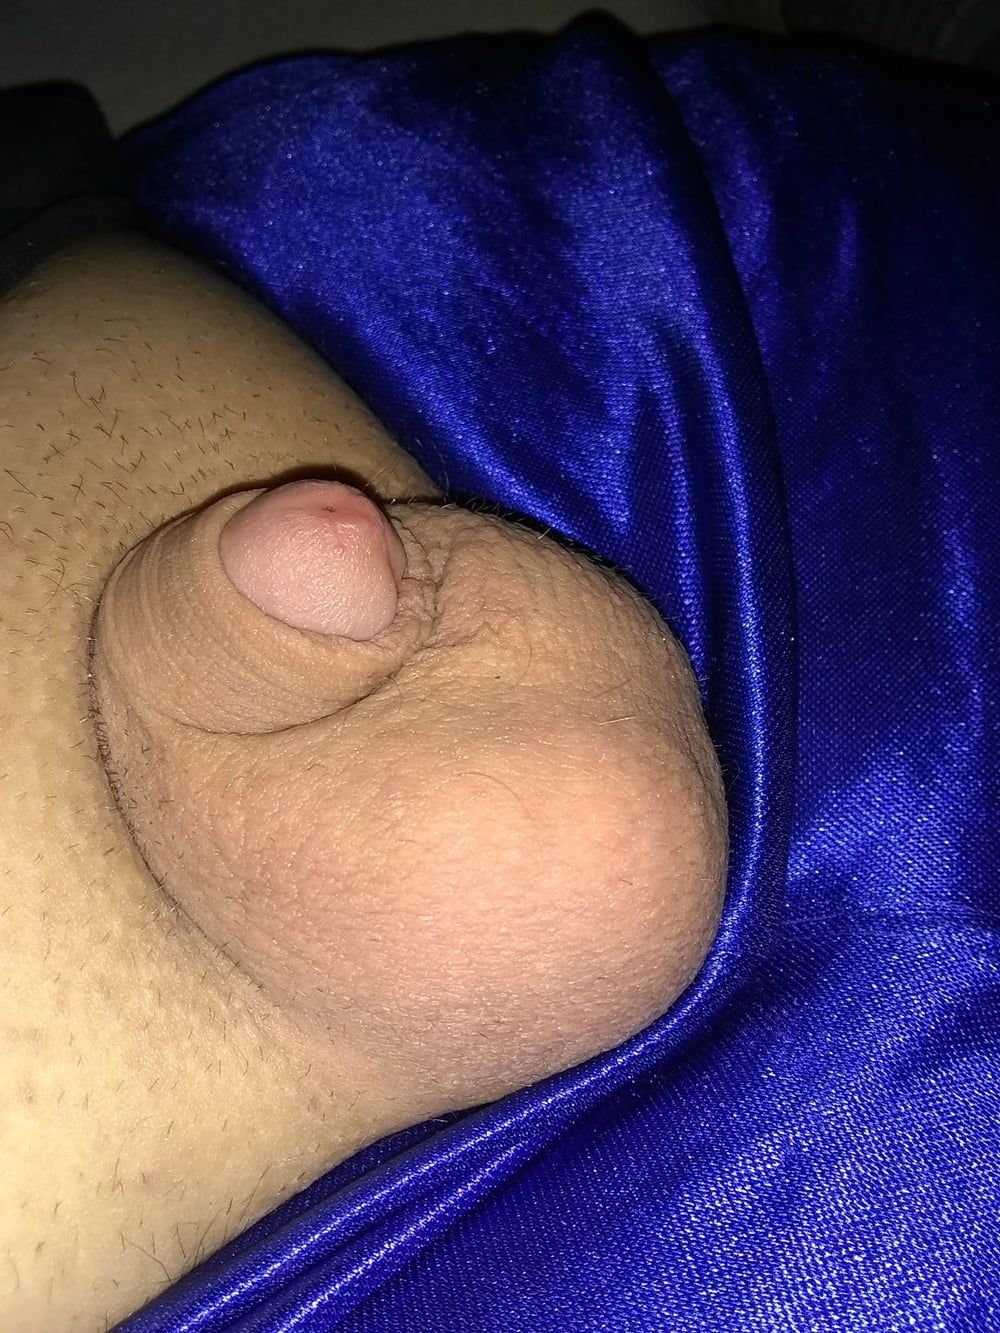 newer pics of my penis or balls #15